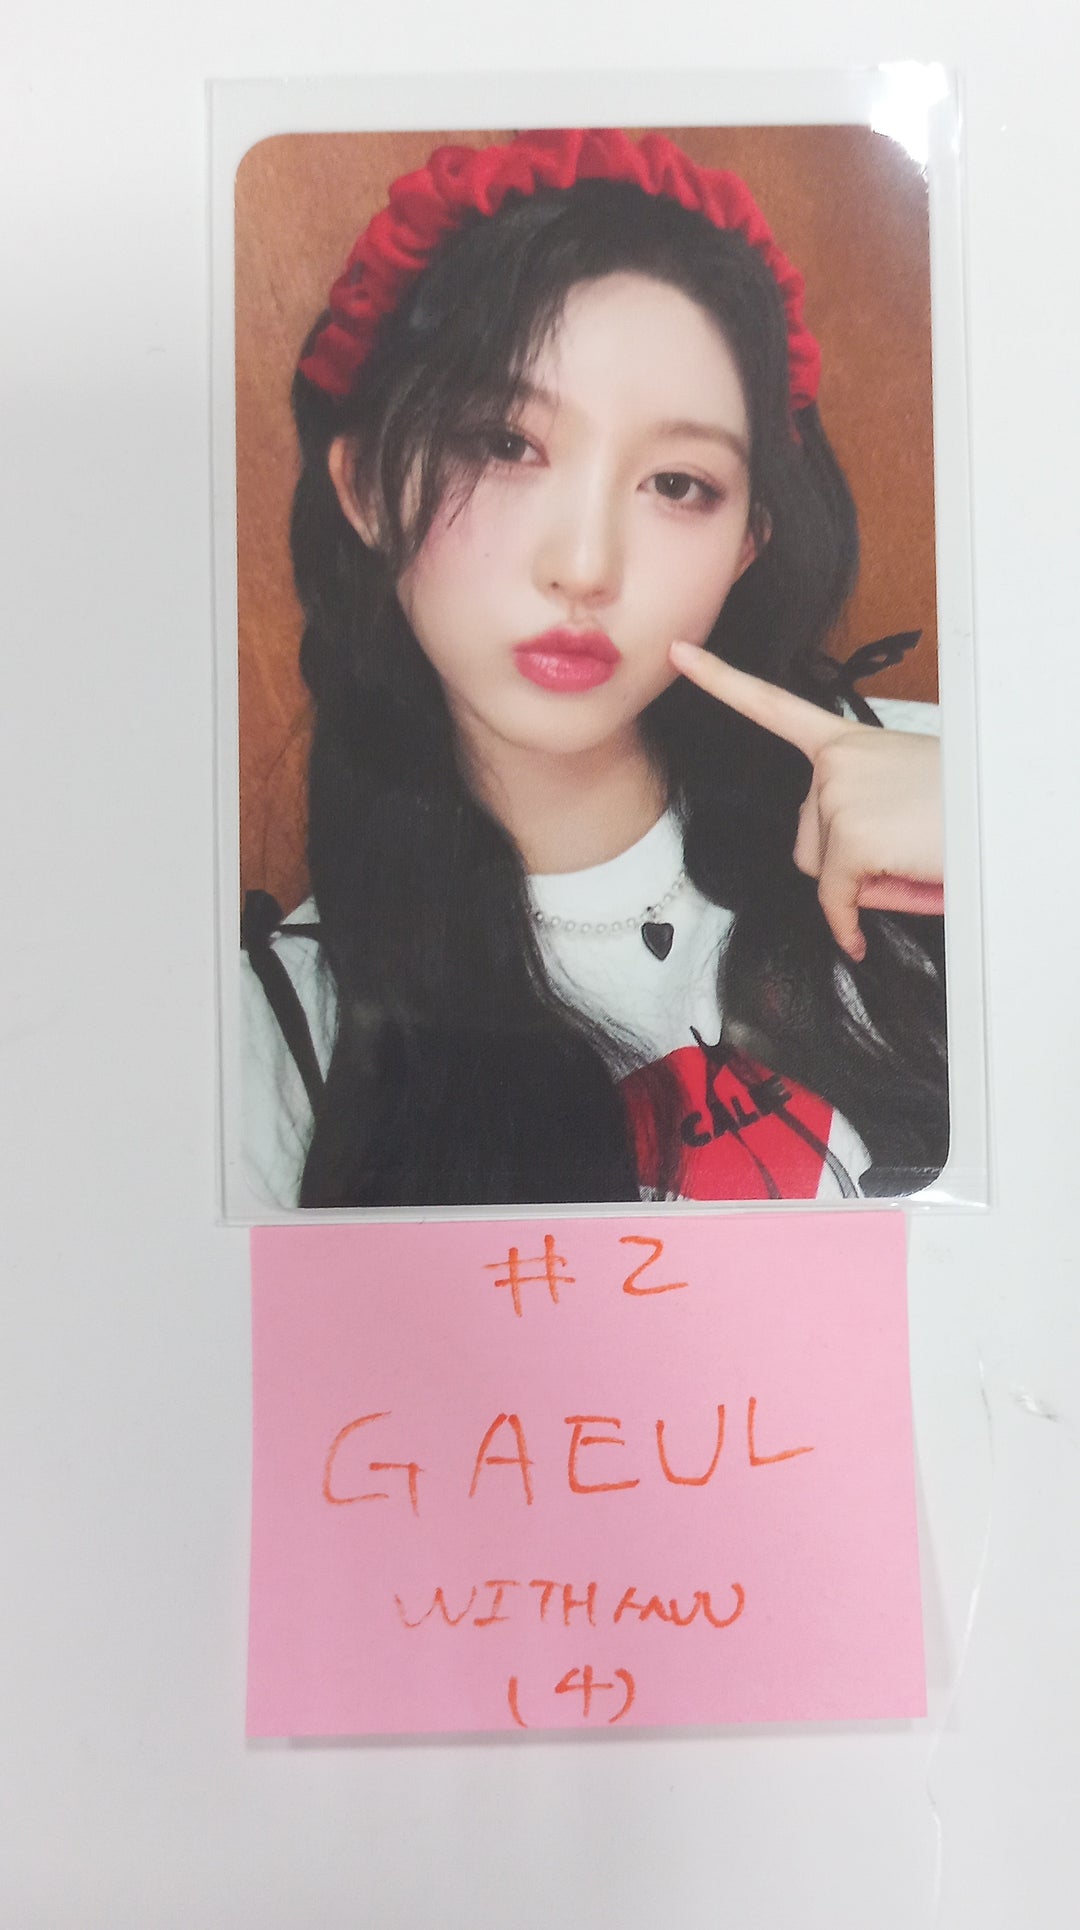 IVE "IVE Switch" - Withmuu Fansign Event Photocard [24.5.20]